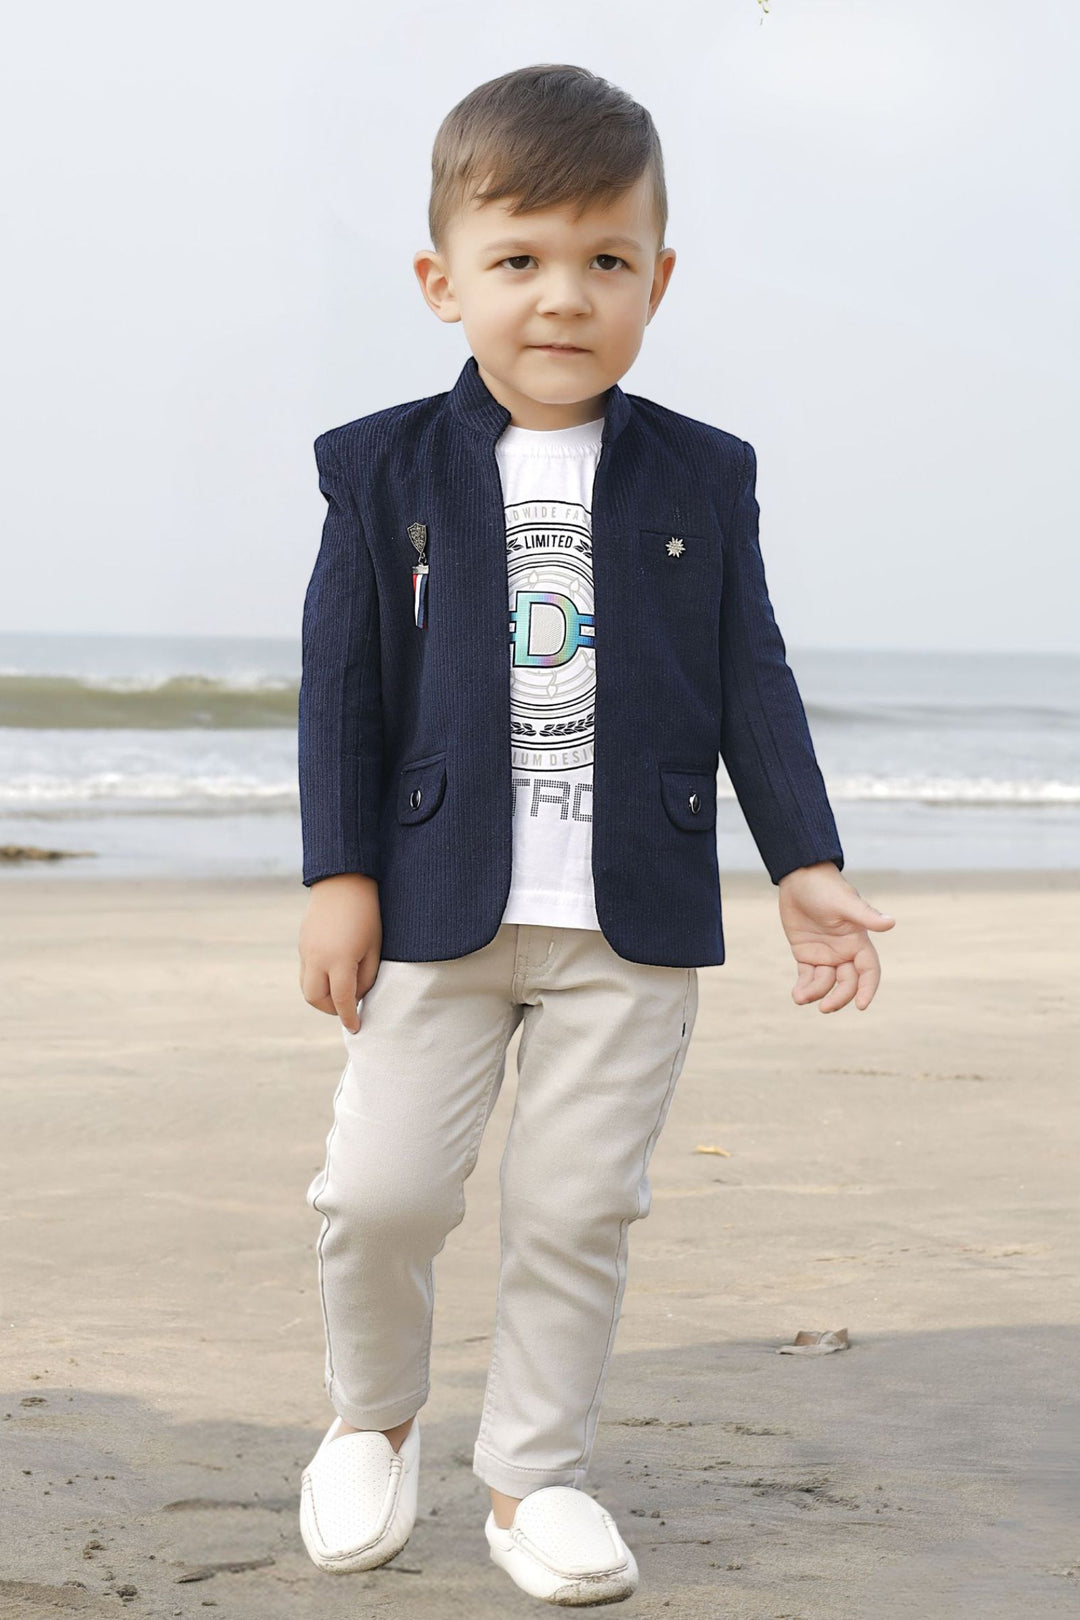 Navy Blue Waist Coat with White T-Shirt and Grey Pant Set for Boys